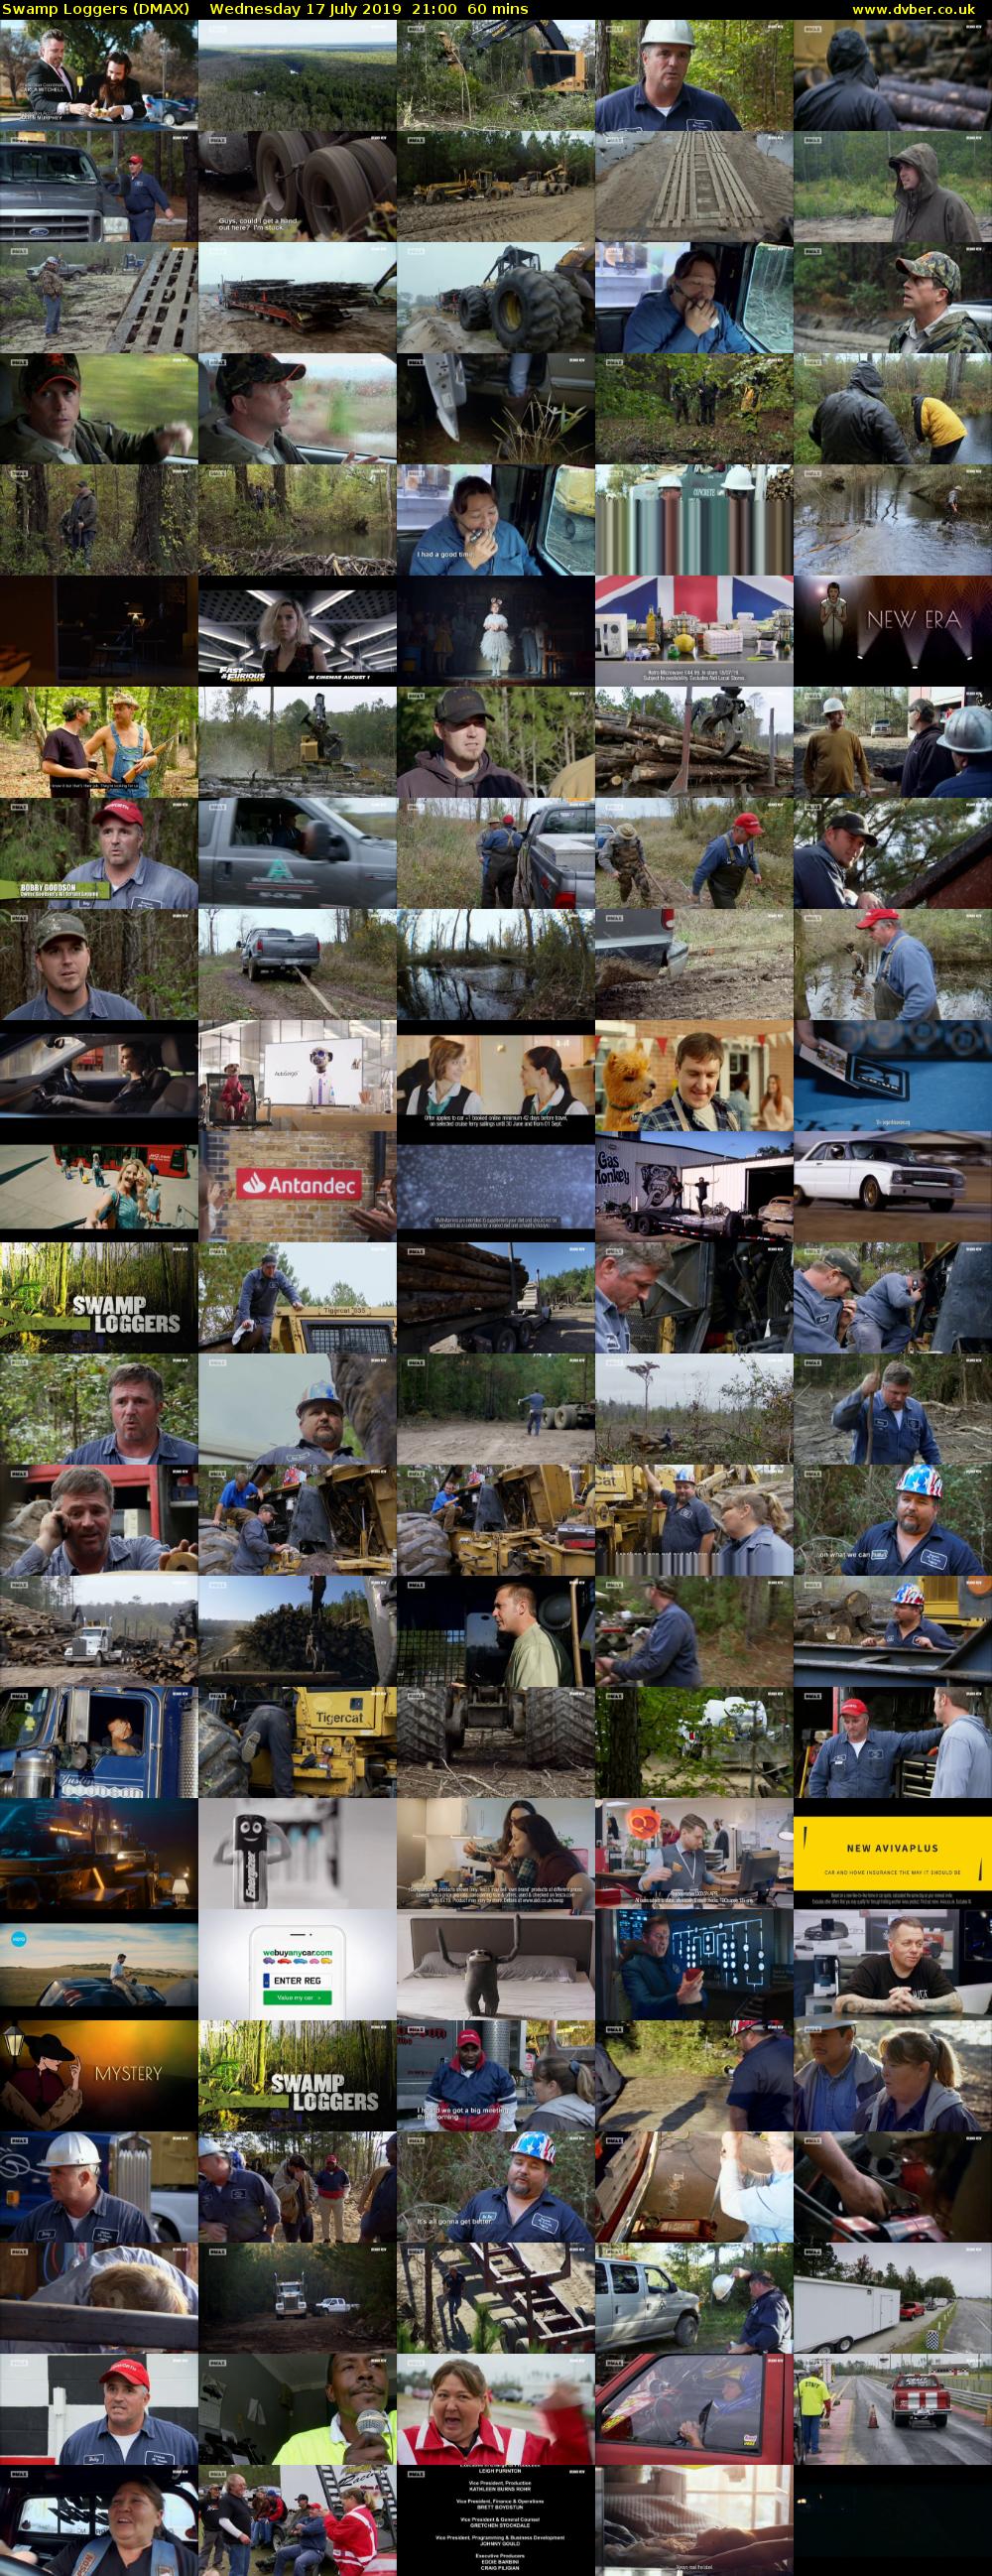 Swamp Loggers (DMAX) Wednesday 17 July 2019 21:00 - 22:00